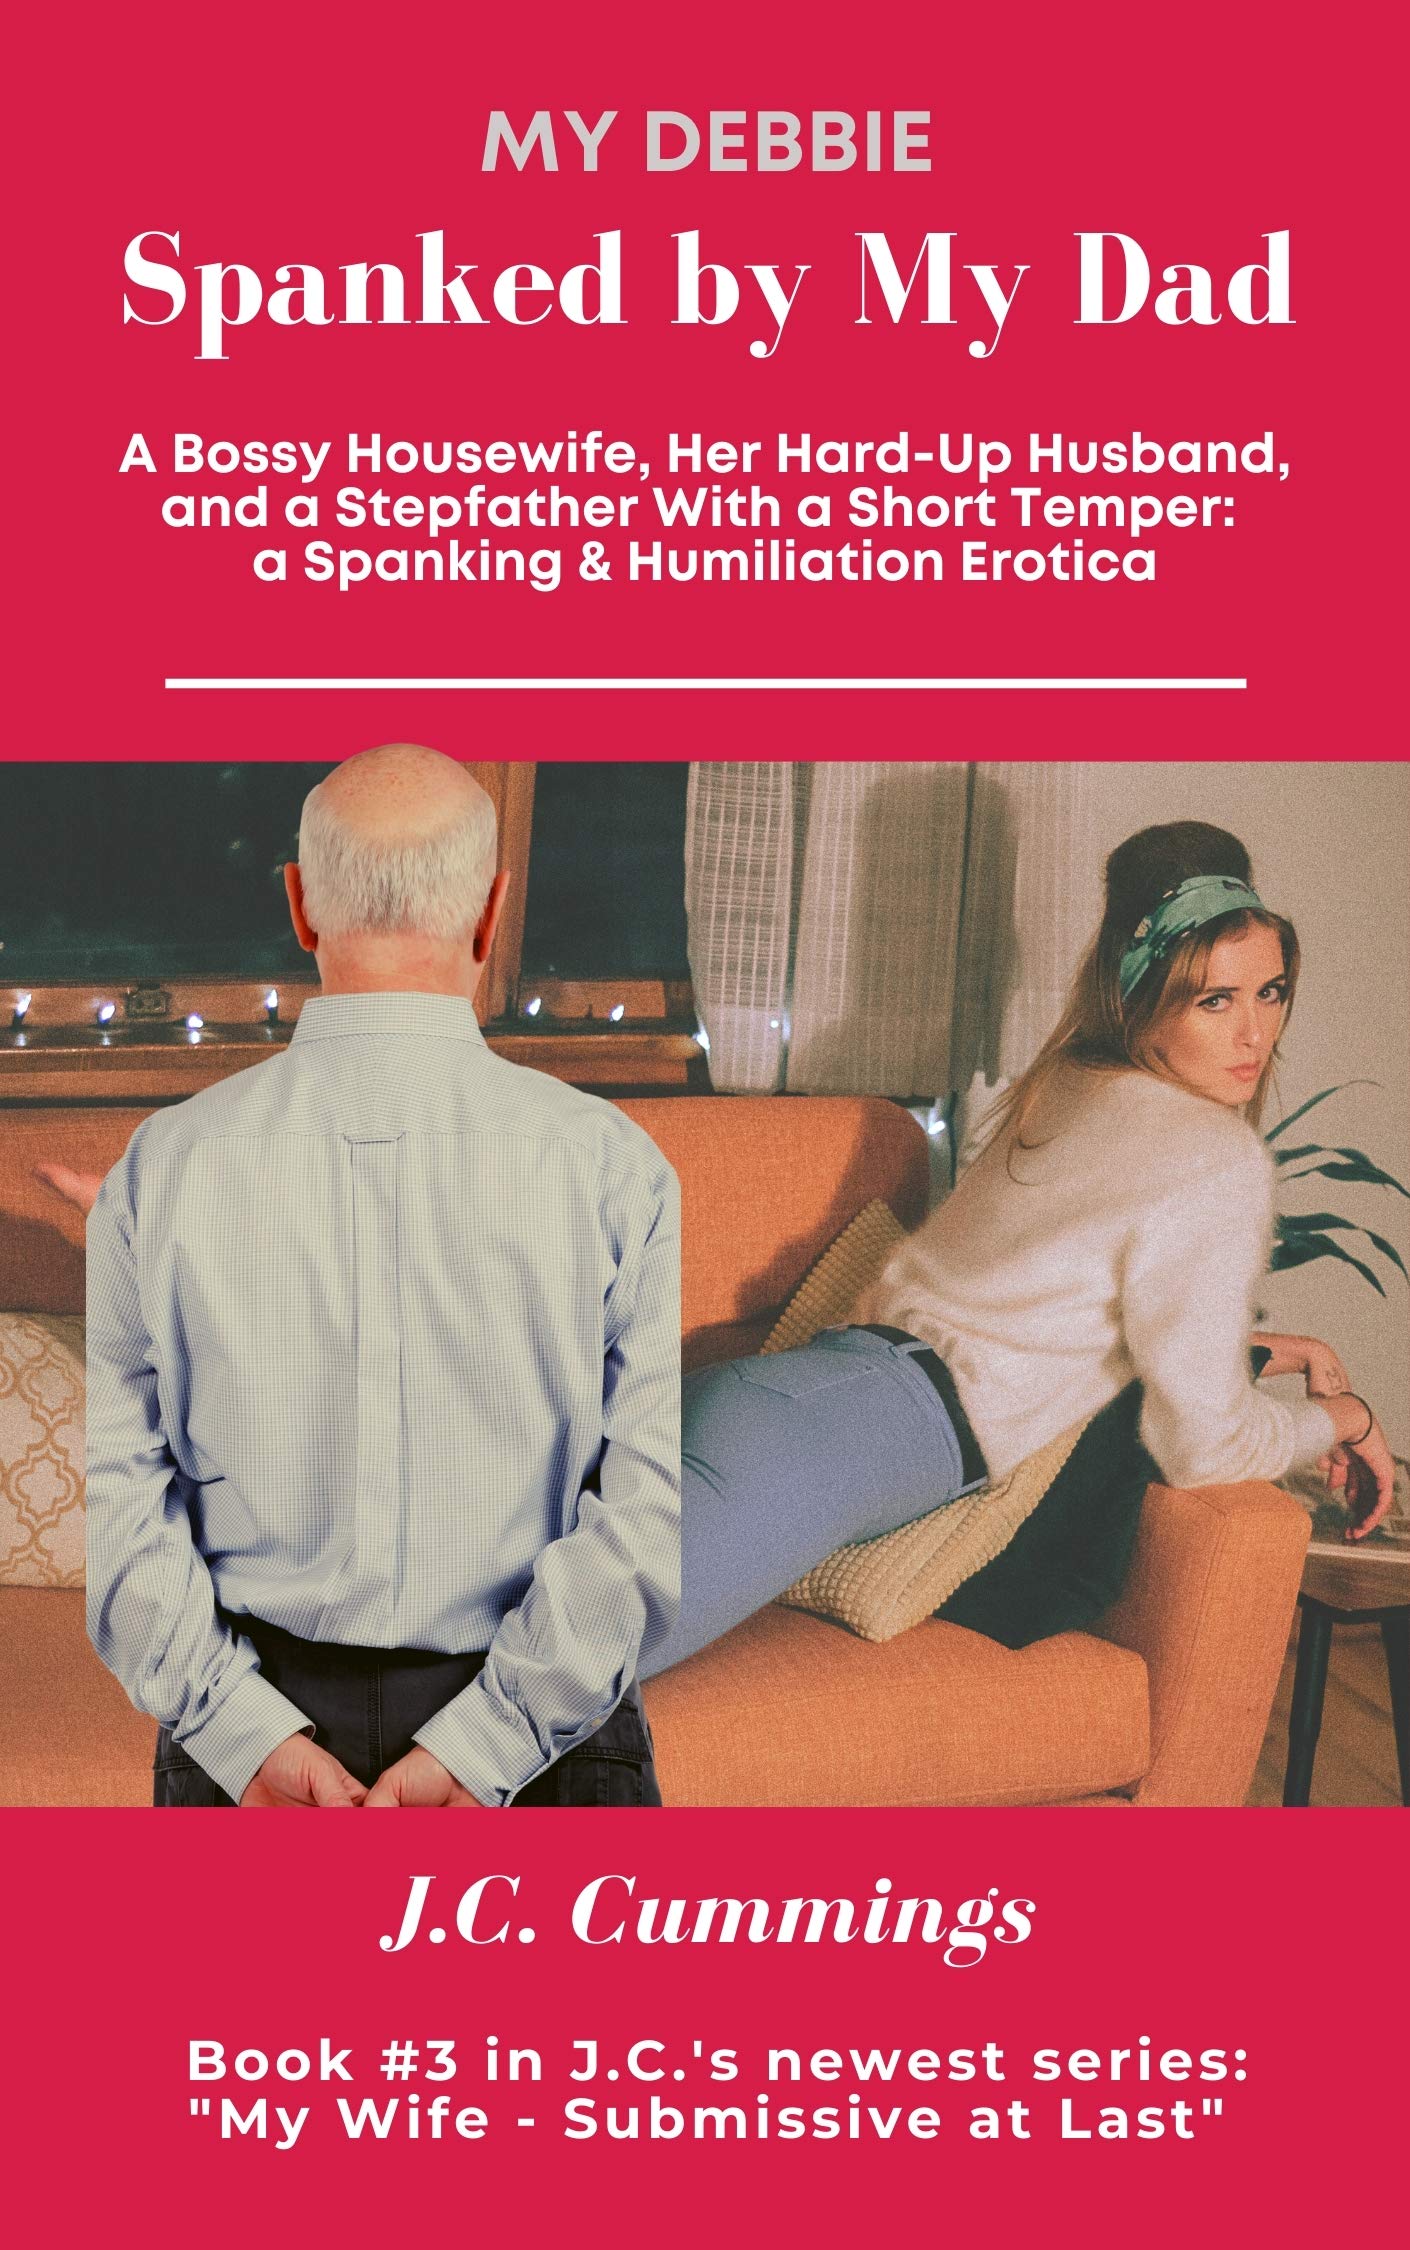 alyssa sherwood recommends spanked by old man pic